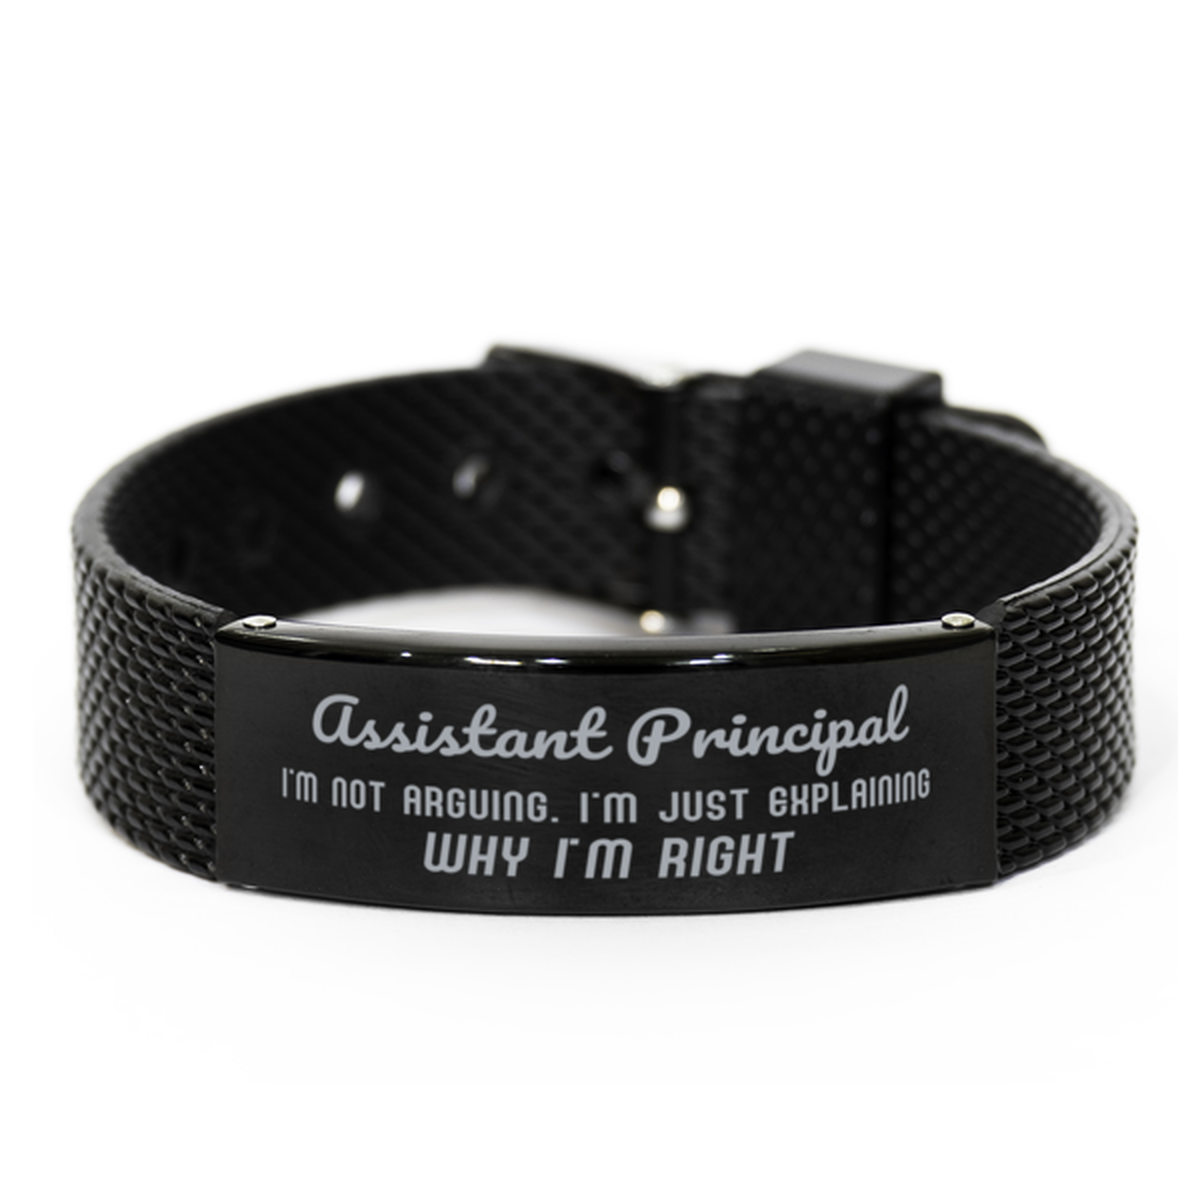 Assistant Principal I'm not Arguing. I'm Just Explaining Why I'm RIGHT Black Shark Mesh Bracelet, Funny Saying Quote Assistant Principal Gifts For Assistant Principal Graduation Birthday Christmas Gifts for Men Women Coworker